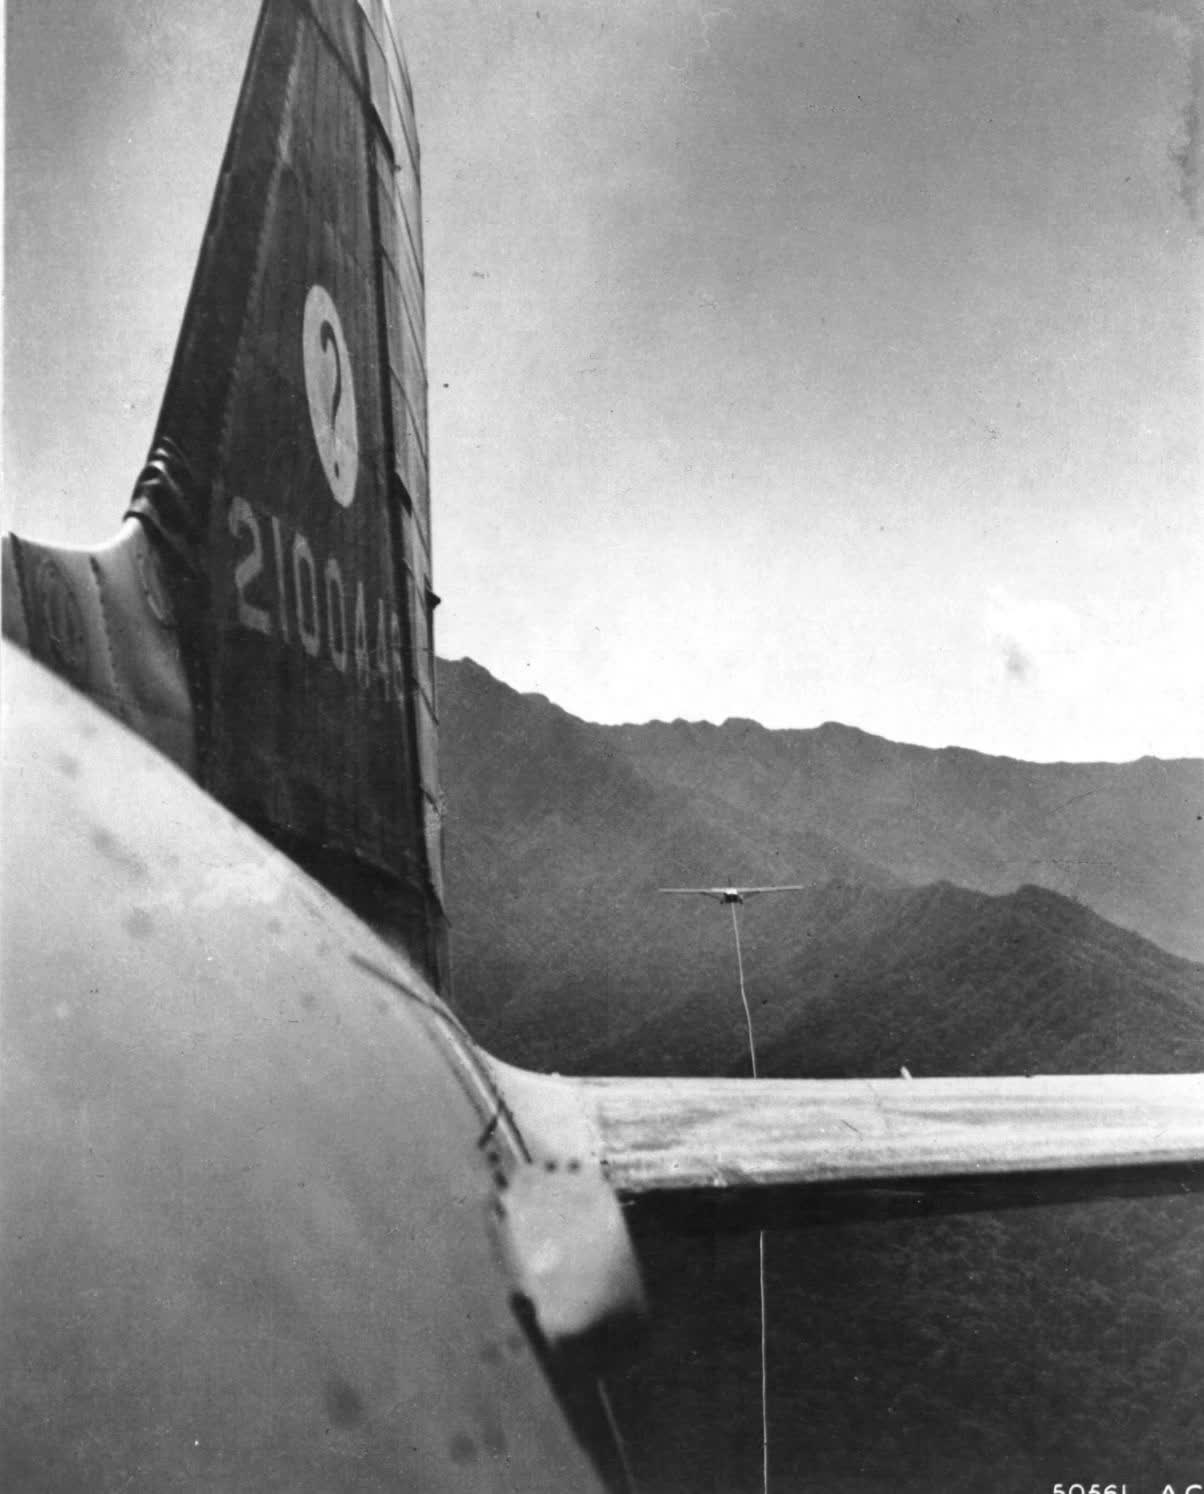 The glider is on tow 8,000 ft. in the sky over the Chiba Hills, which form a natural barrier between Japanese and Allied territory